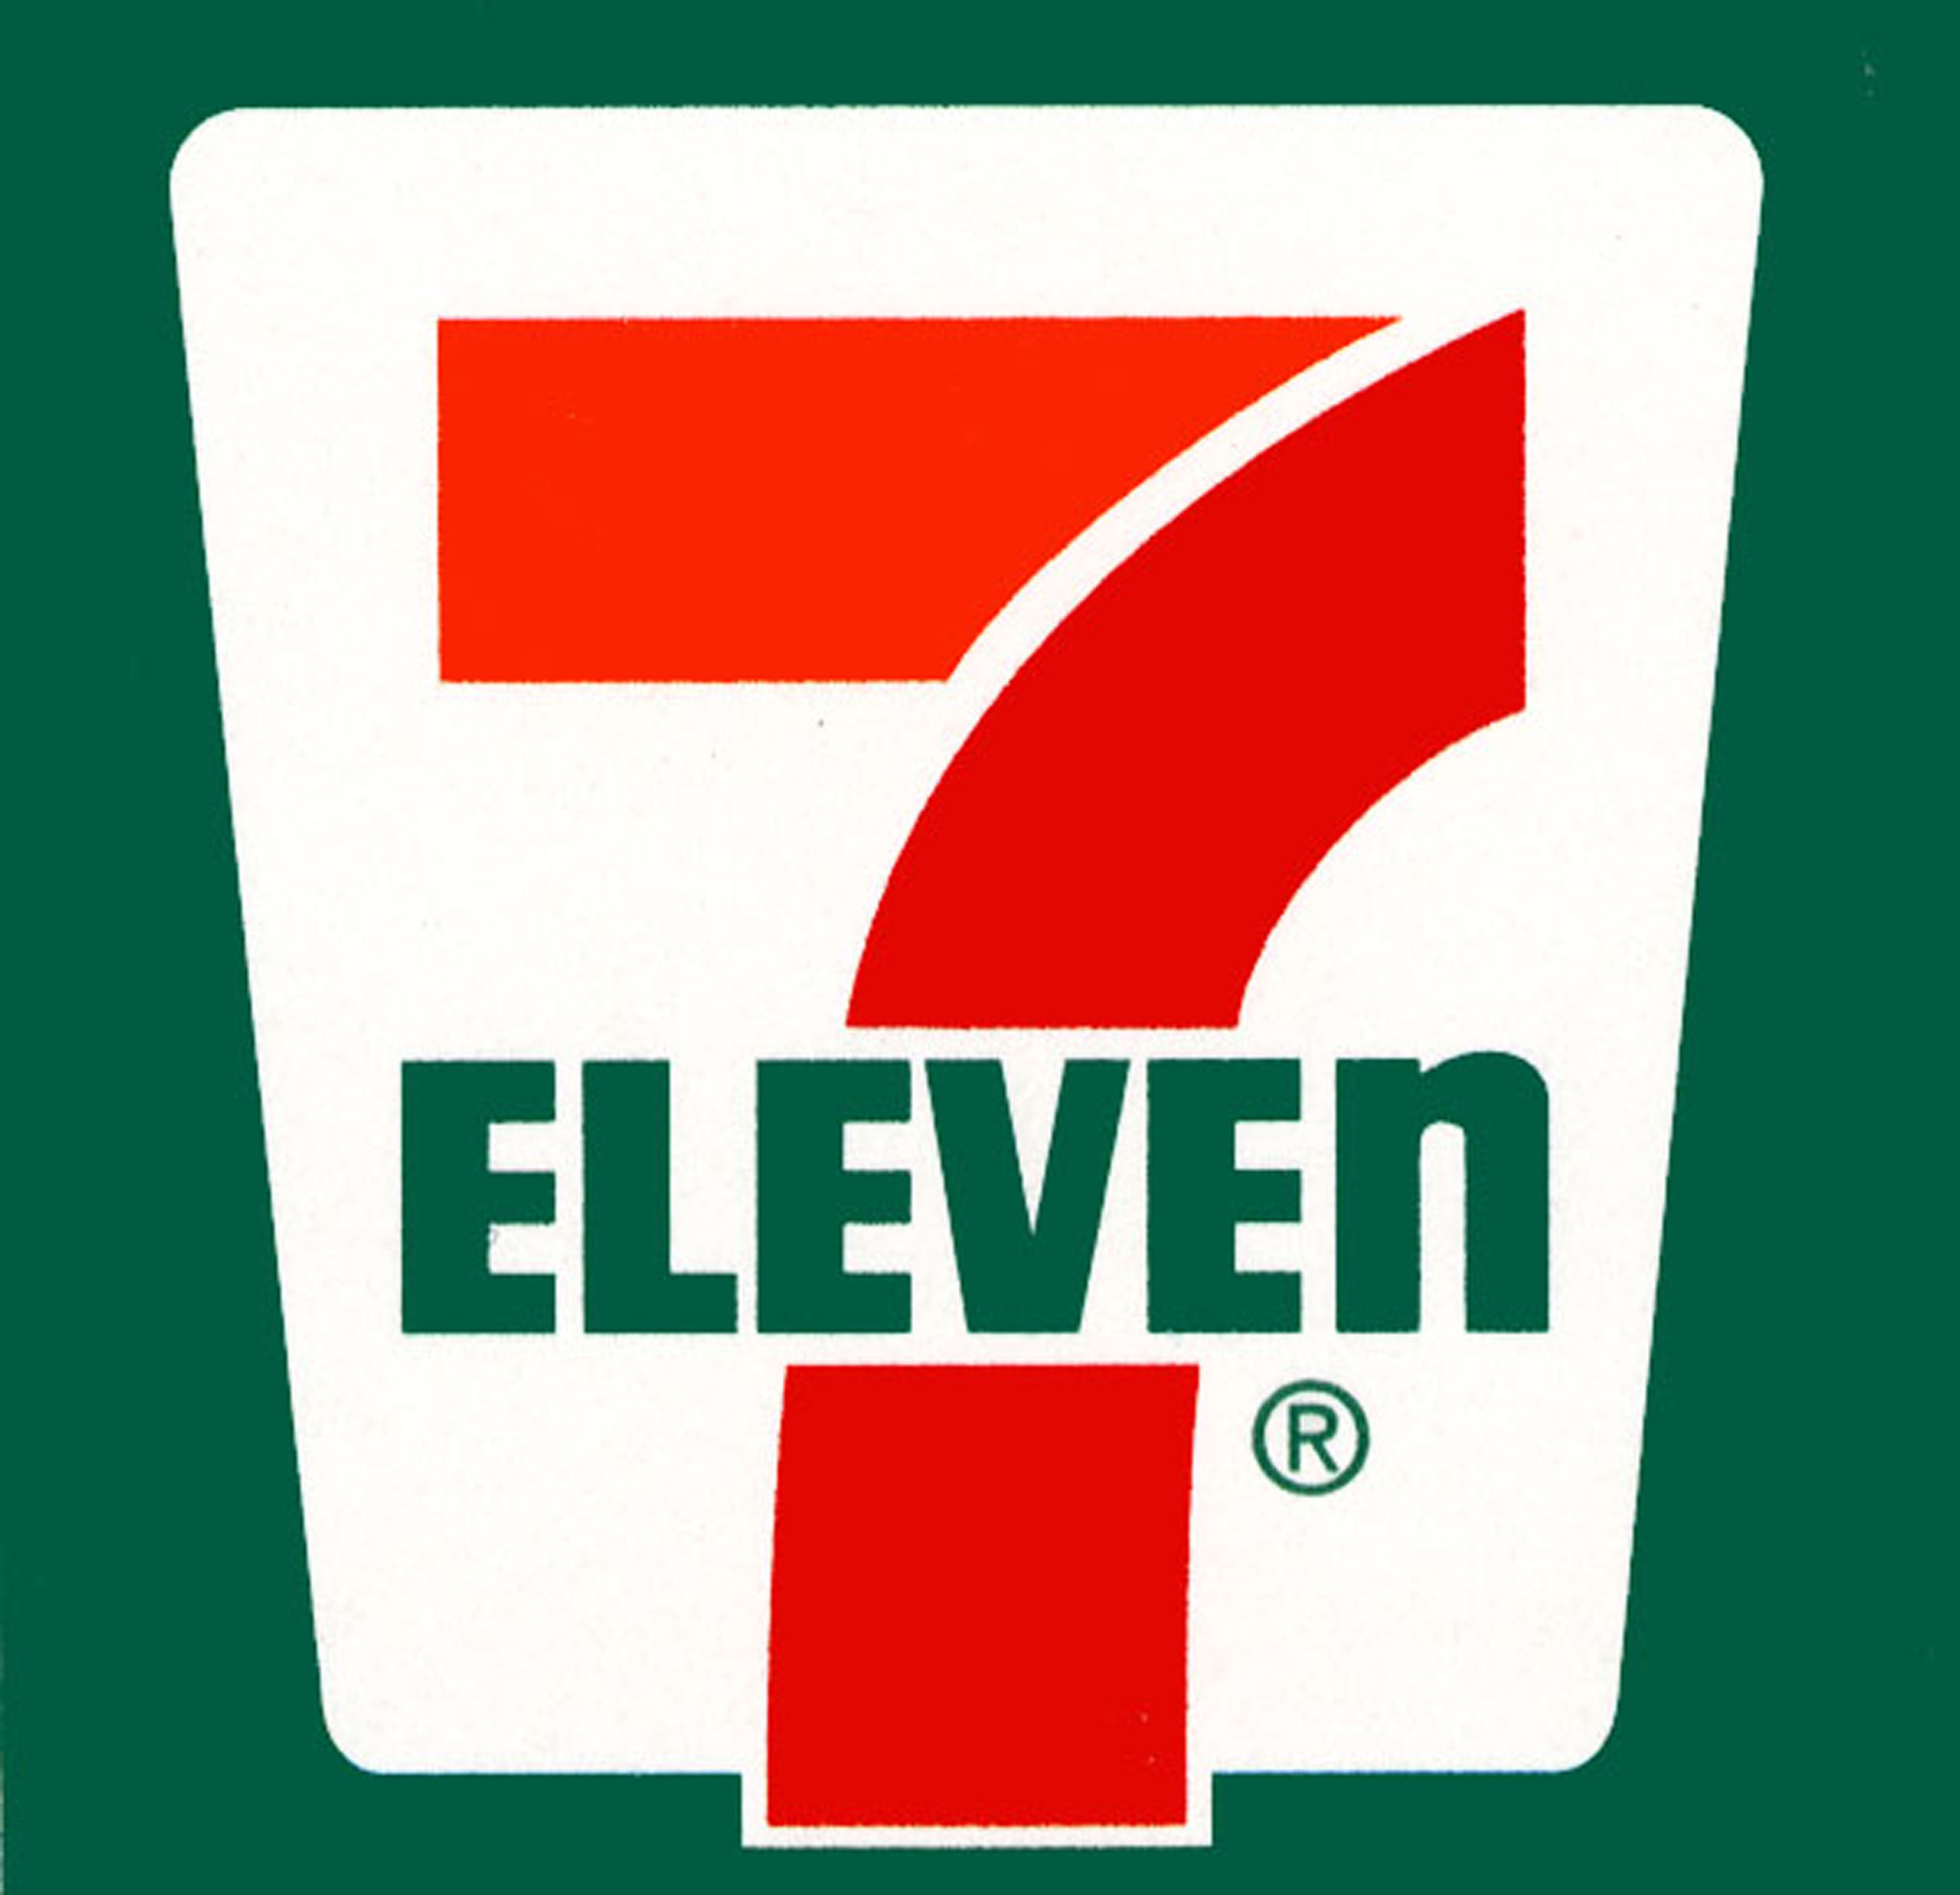 7-Eleven offers delivery of alcohol and pizzas via its app